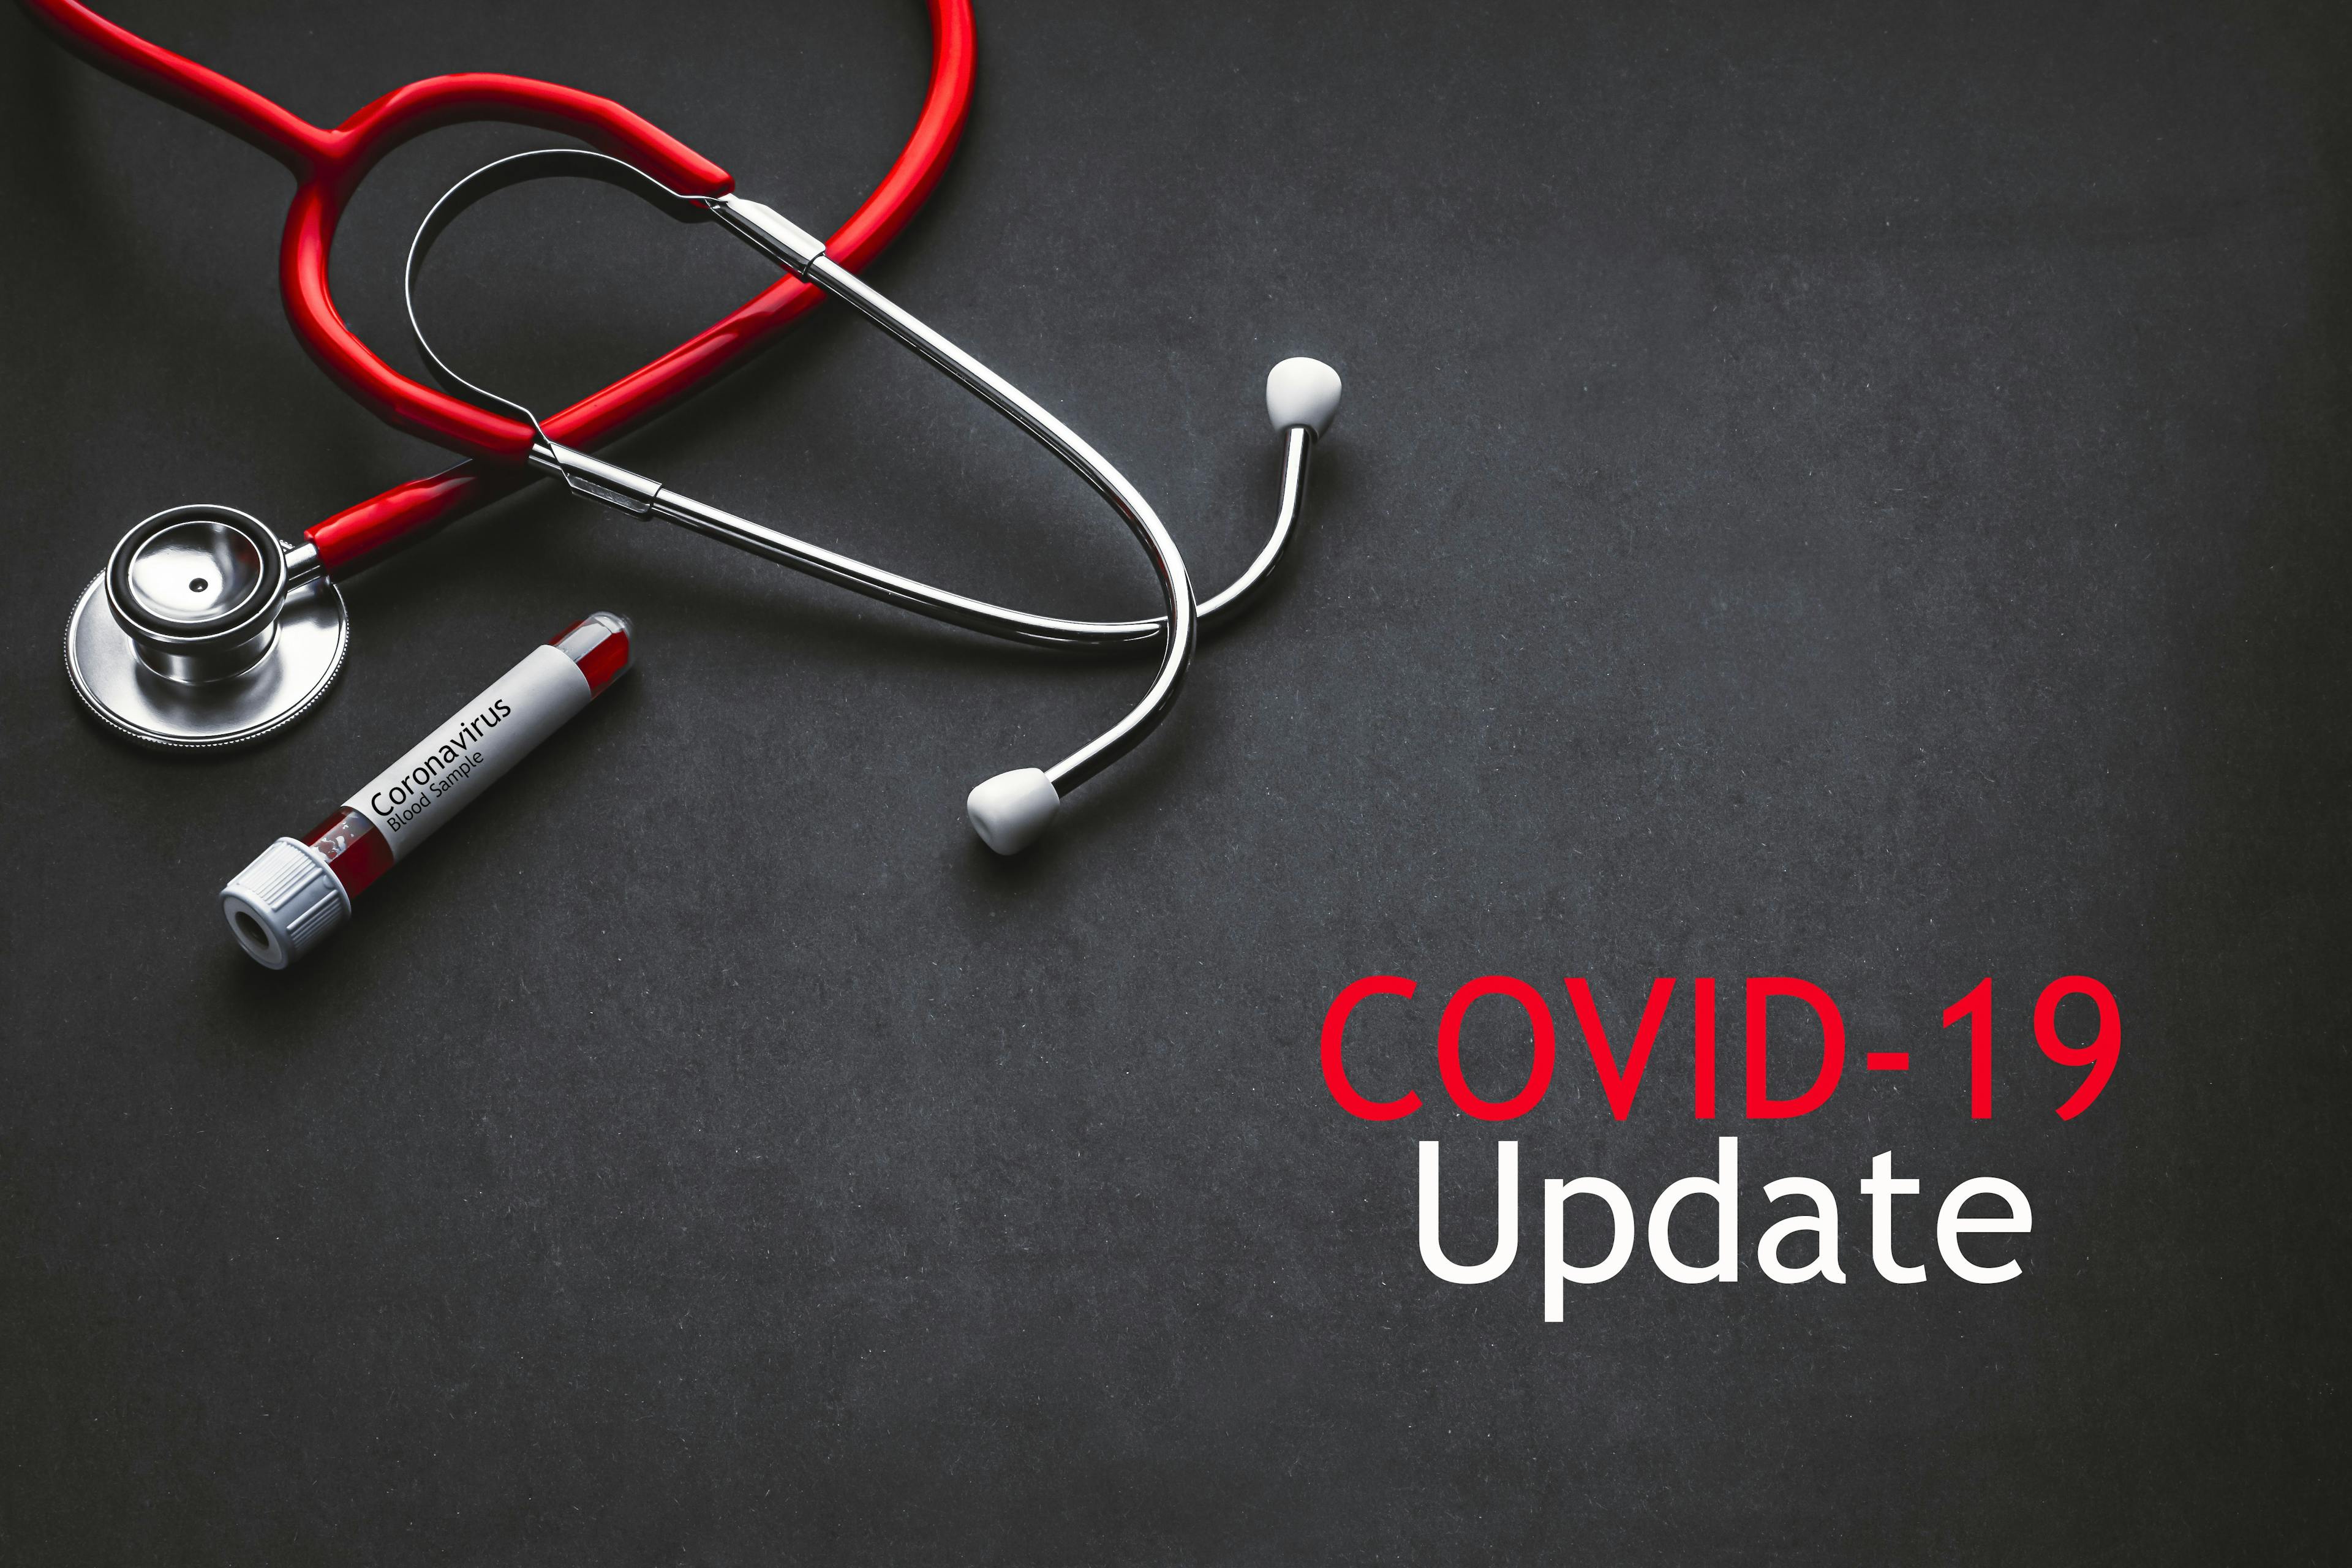 COVID-19 Updates: US and Global Cases, Deaths, and Recoveries as of March 1, 2021